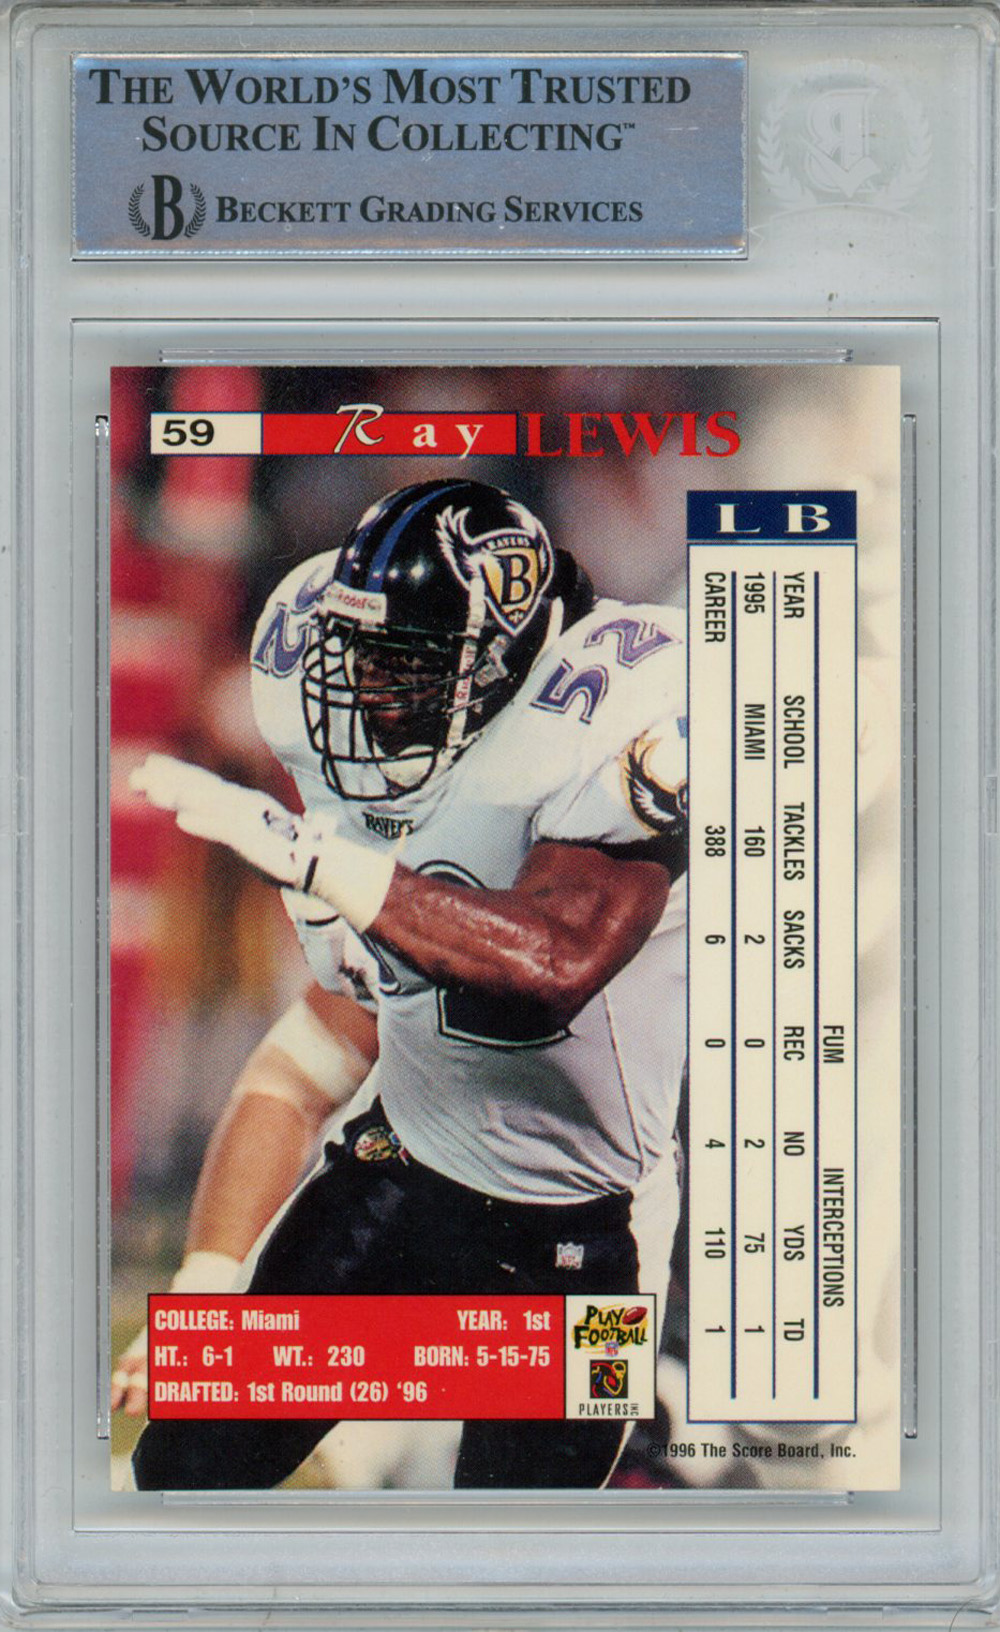 Ray Lewis Autographed 1996 Proline Intense #59 Rookie Card Beckett Slab